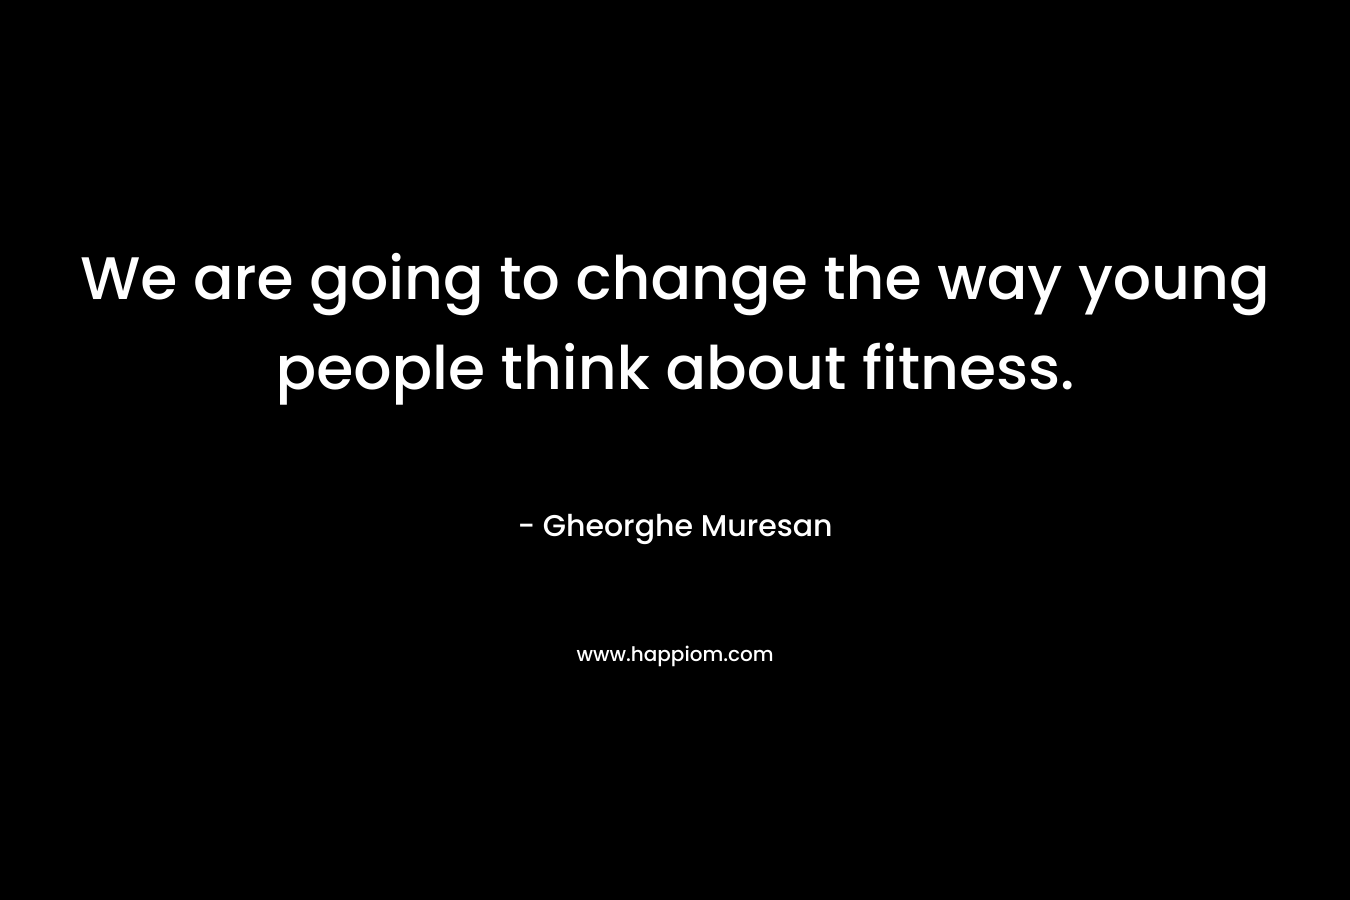 We are going to change the way young people think about fitness.